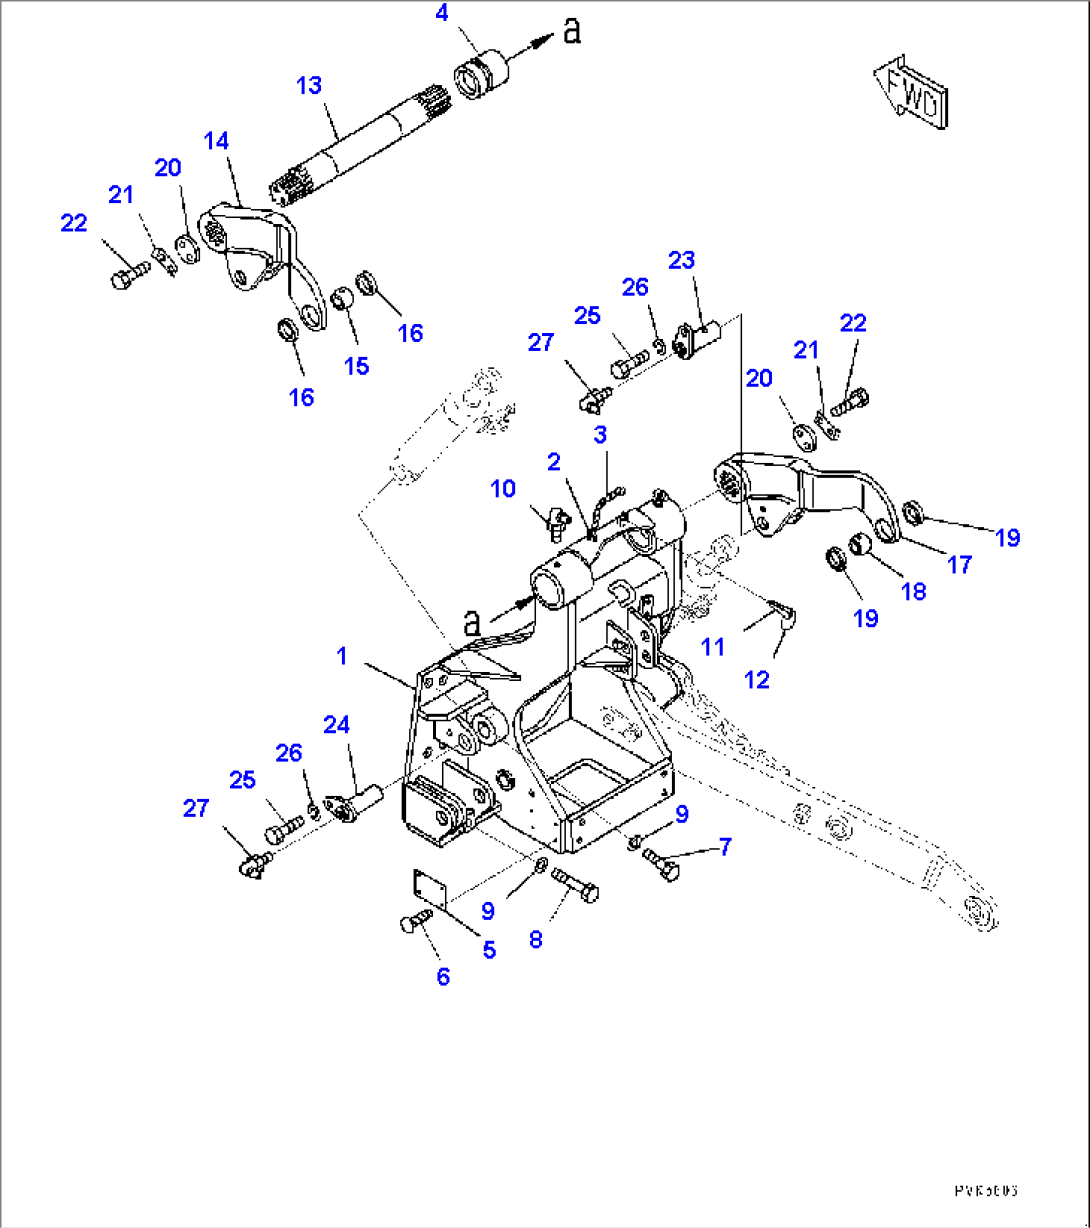 3-Point Hitch, Bracket and Arm (#90210-)